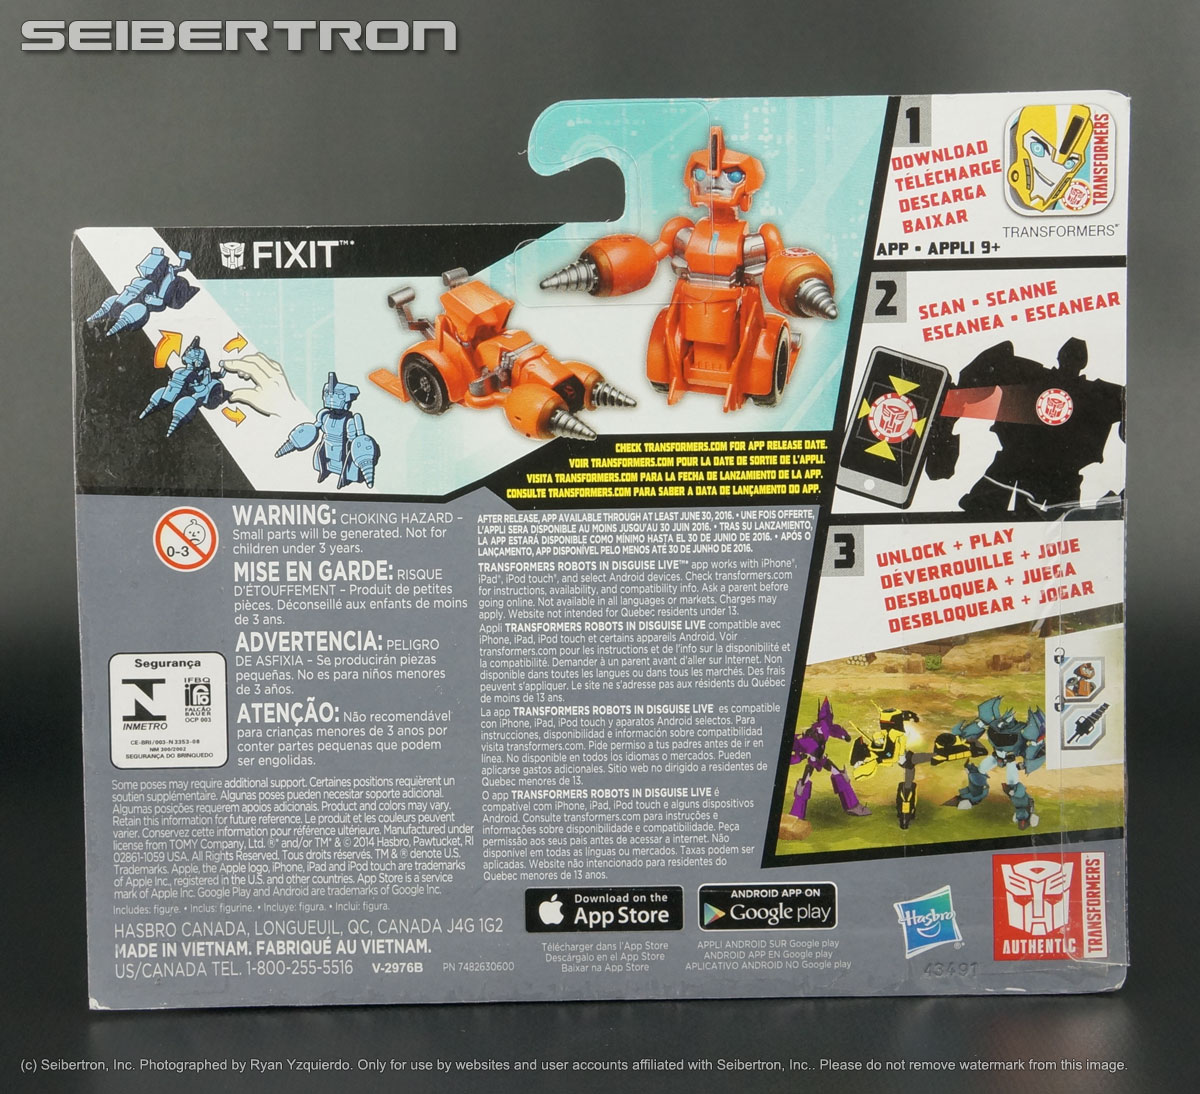 Transformers, Masters of the Universe, Teenage Mutant Ninja Turtles, Comic Books, and more! listings from Seibertron.com: 1-Step FIXIT Transformers Robots In Disguise 2015 Hasbro One New